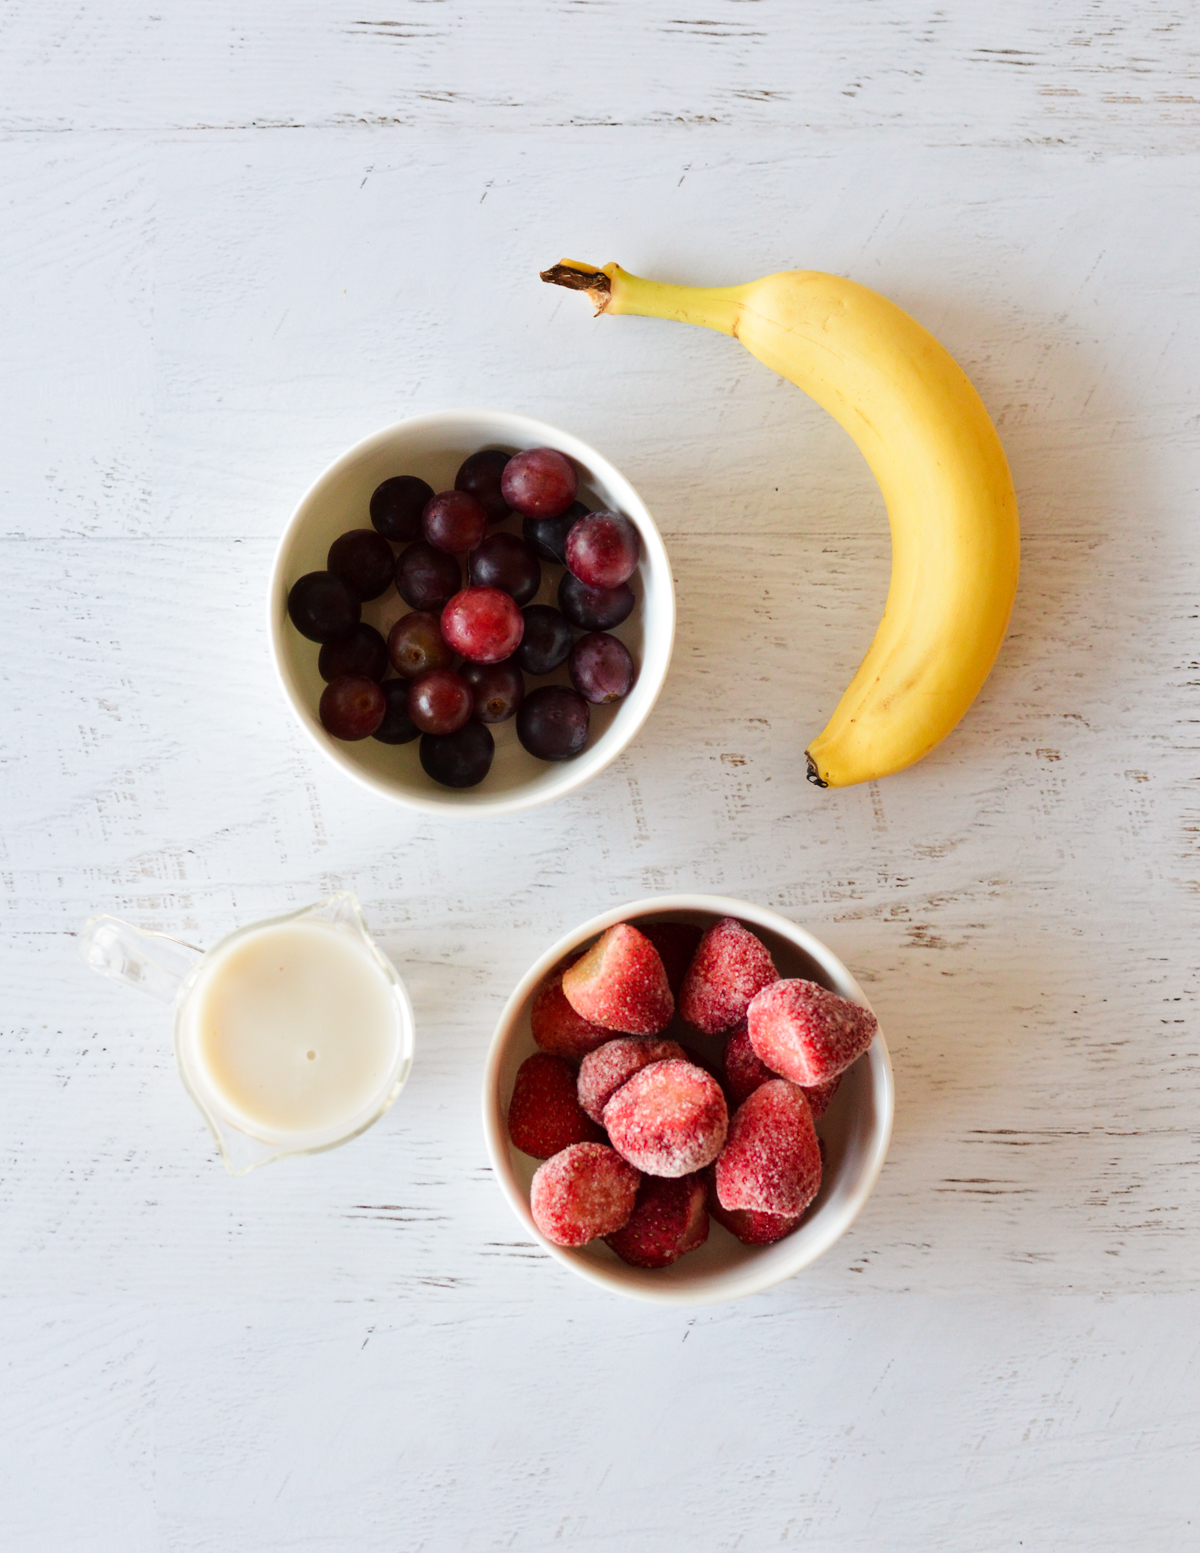 banana, red grapes, strawberries, and almond milk.